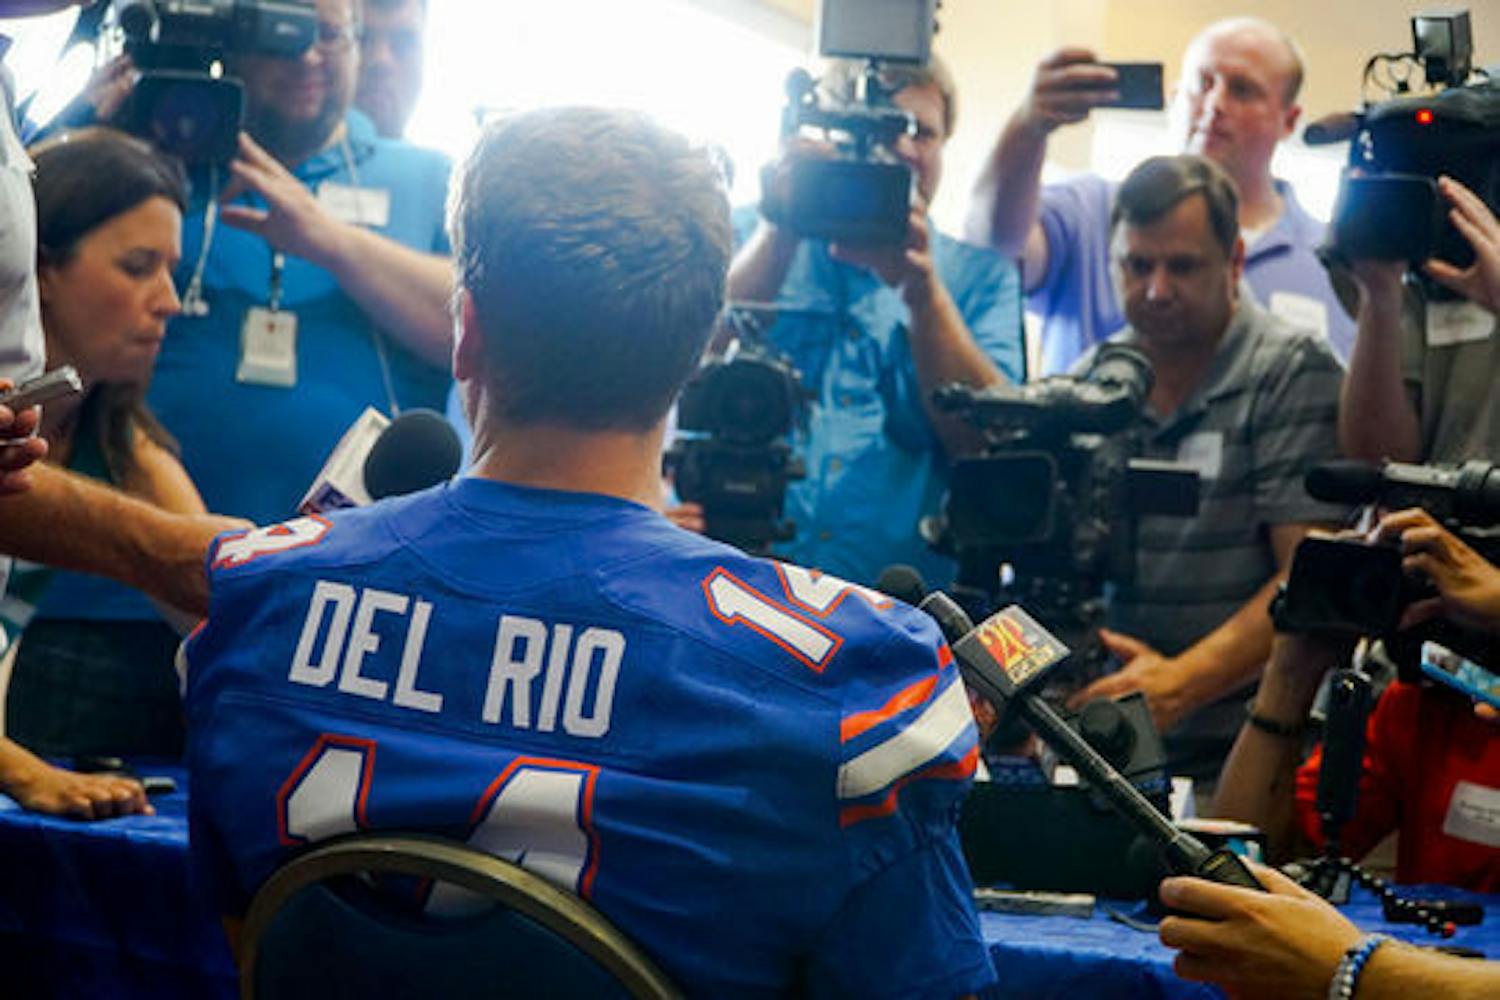 After a 5-1 record as a starter, Del Rio is fighting to keep his job against redshirt freshman Feleipe Franks and transfer Malik Zaire.